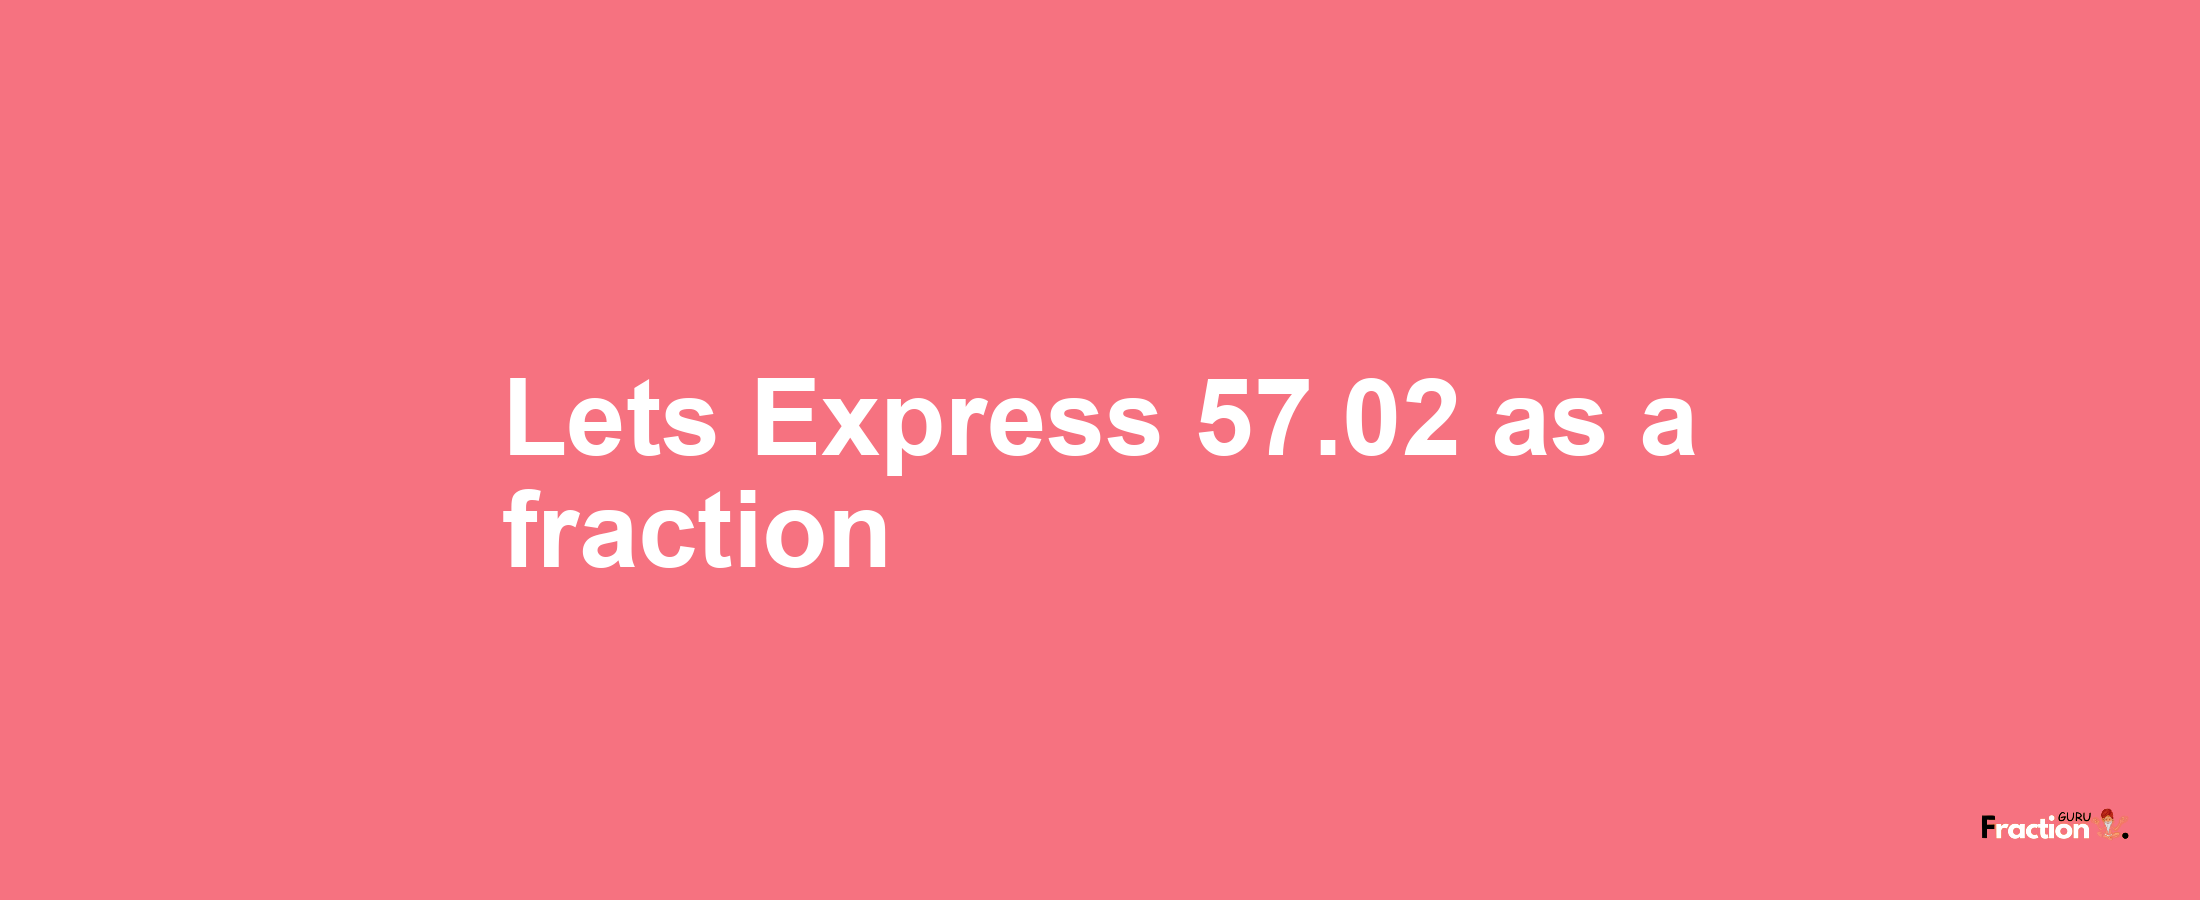 Lets Express 57.02 as afraction